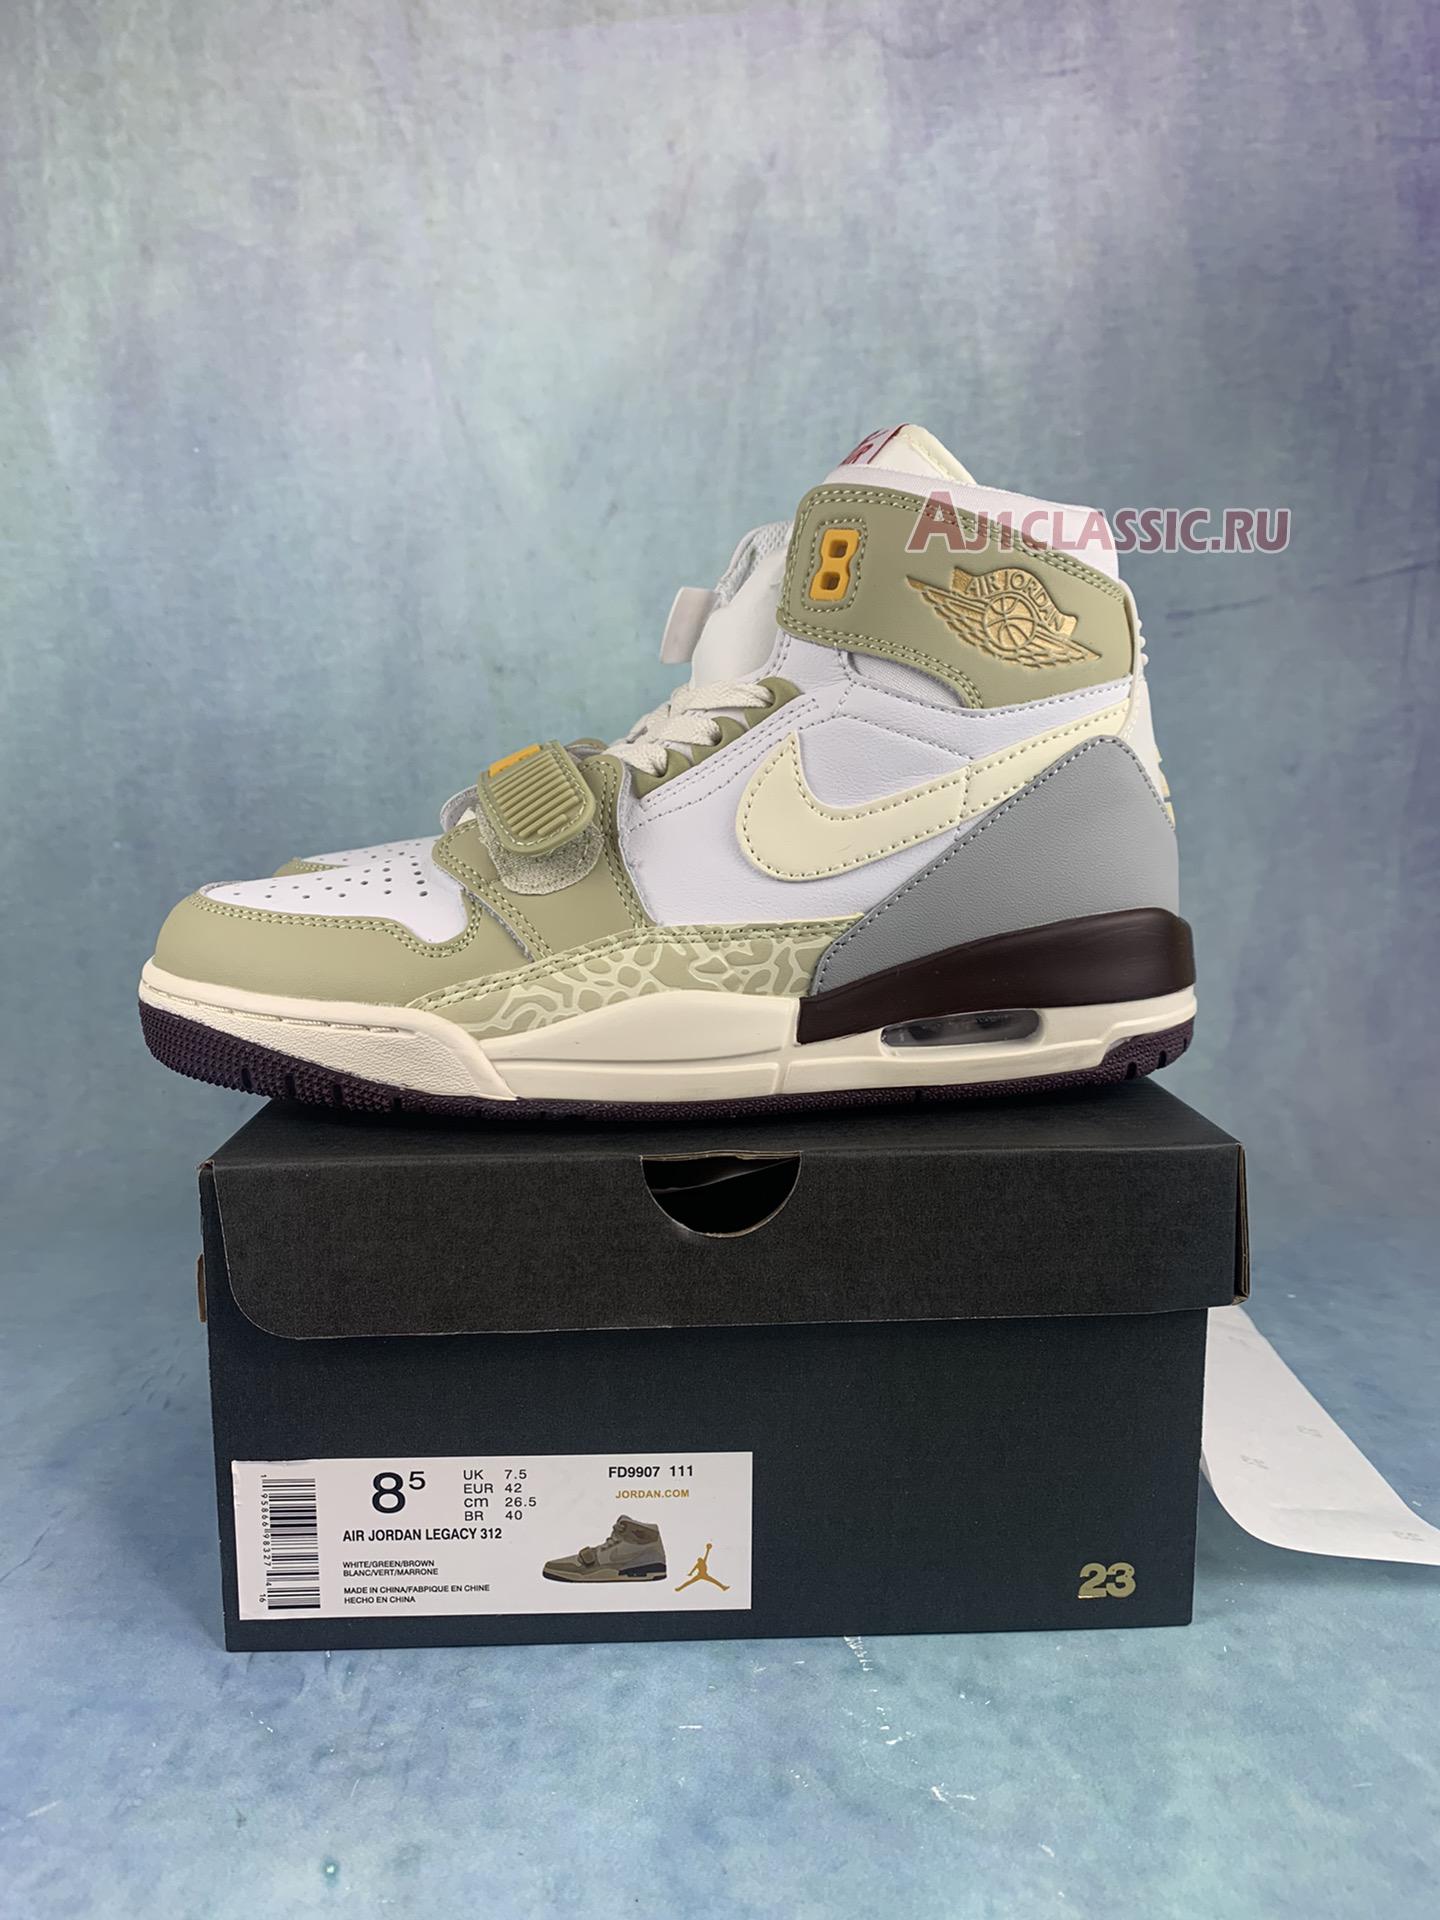 Jordan Legacy 312 Year of the Rabbit FD9907-111 Light Olive/Yellow/Brown/White Sneakers